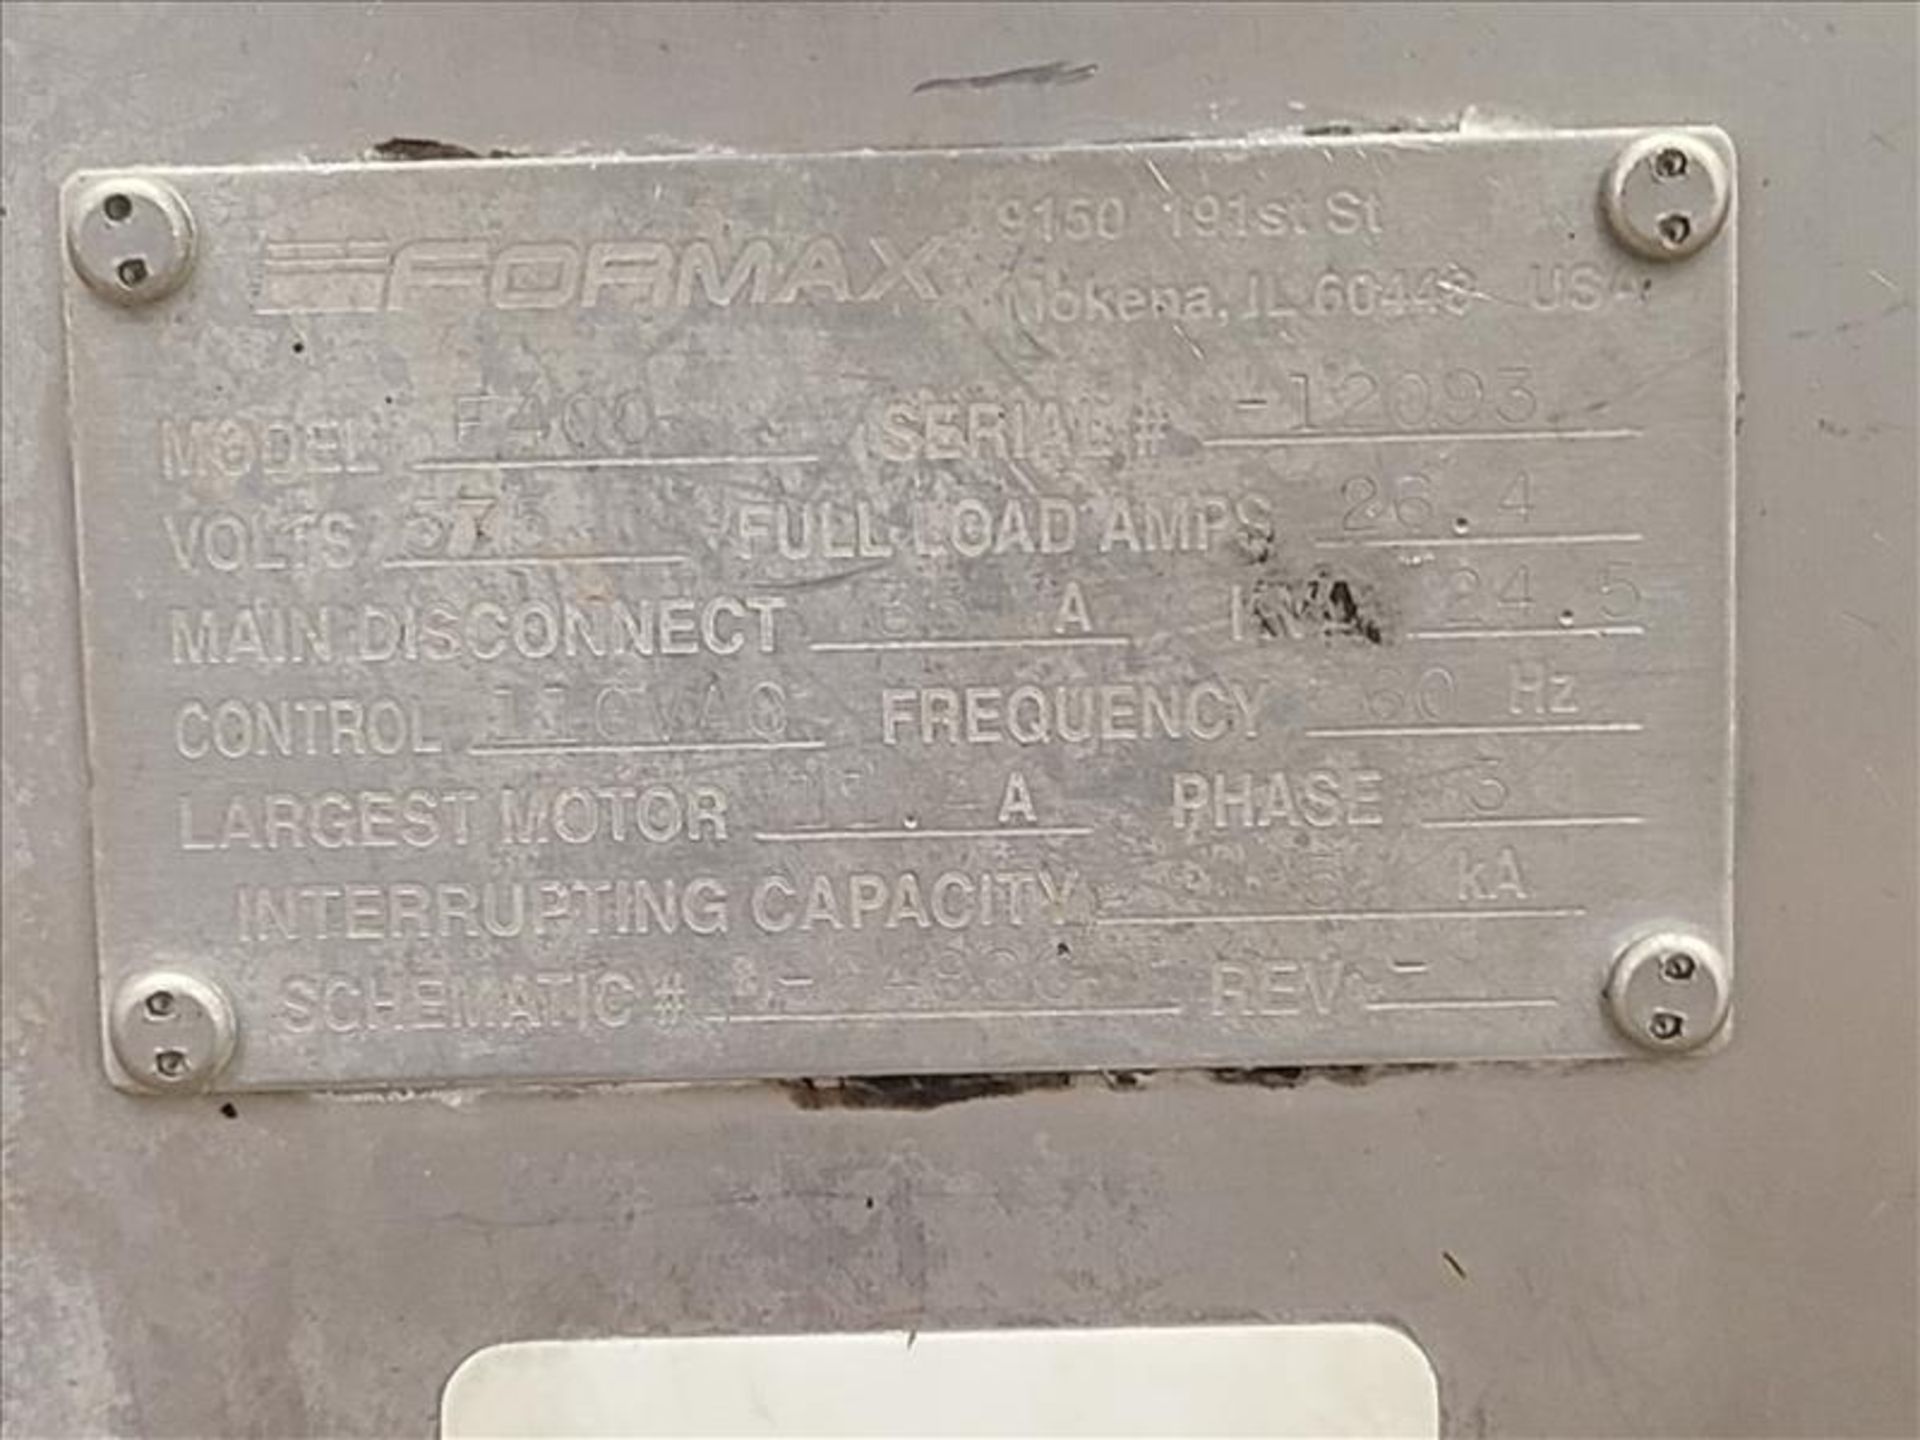 Formax Forming Machine, mod. F400, ser. no. 12093, 575 volts, 3 phase, 60 Hz [Line 3] - Image 3 of 7